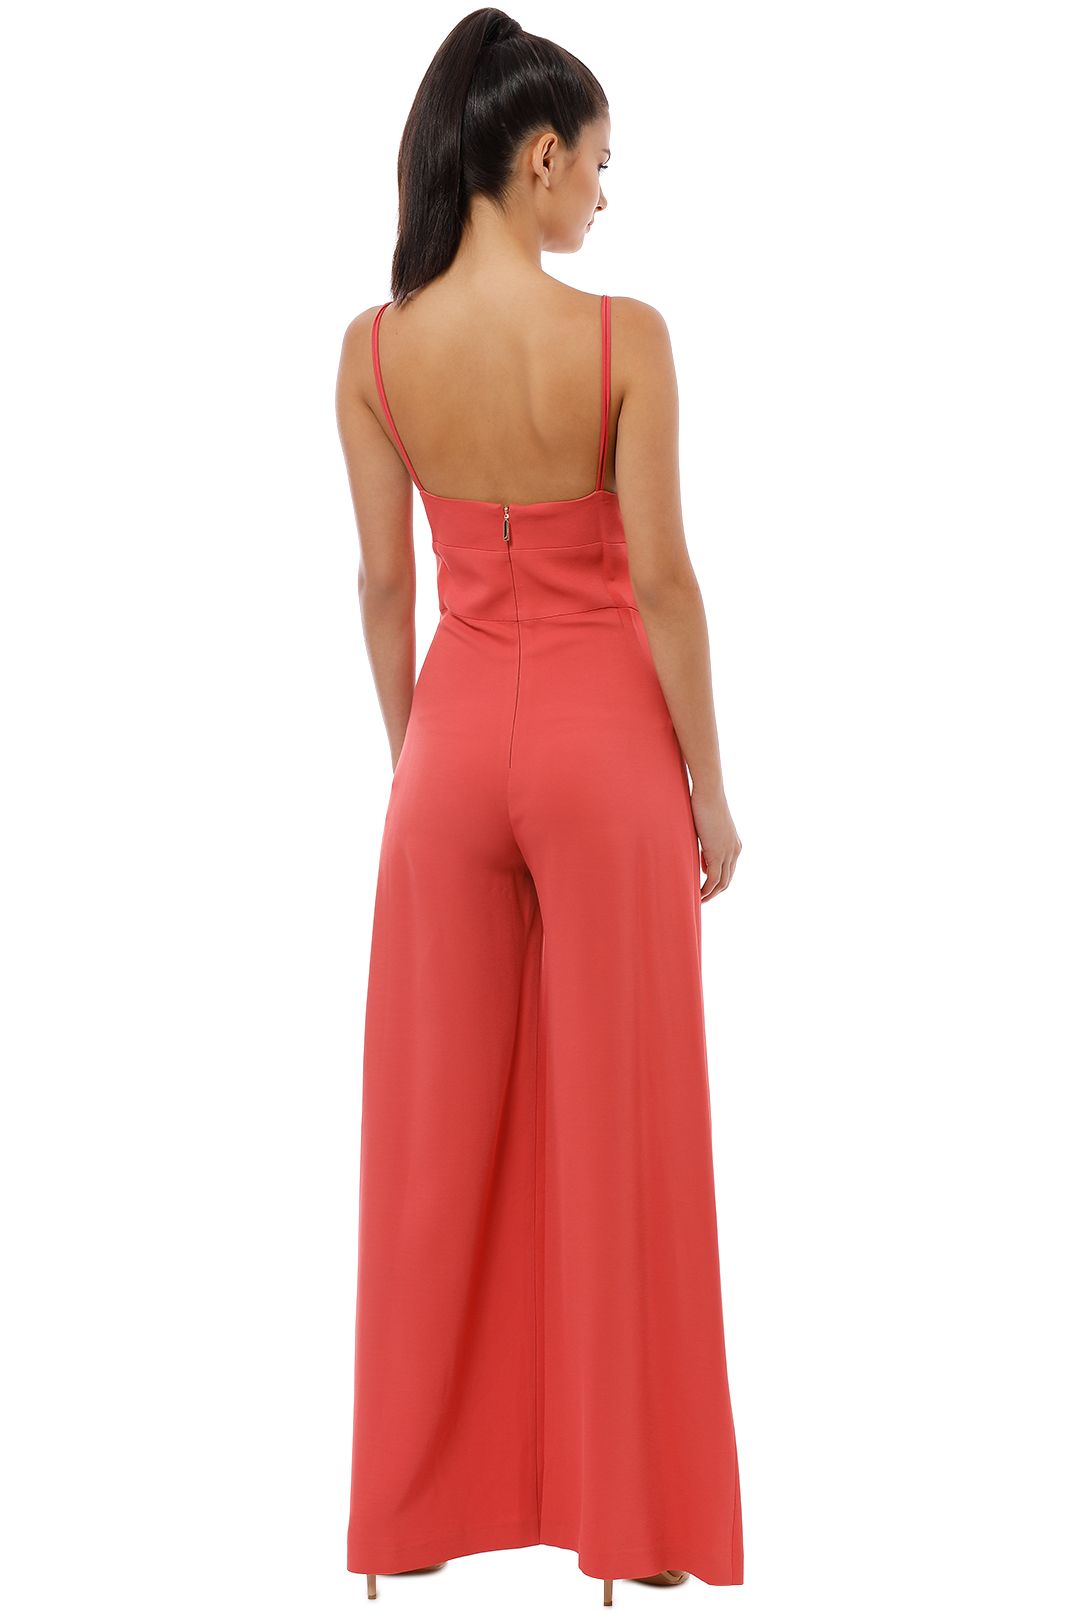 Ginger and Smart - Drift Jumpsuit - Coral - Back